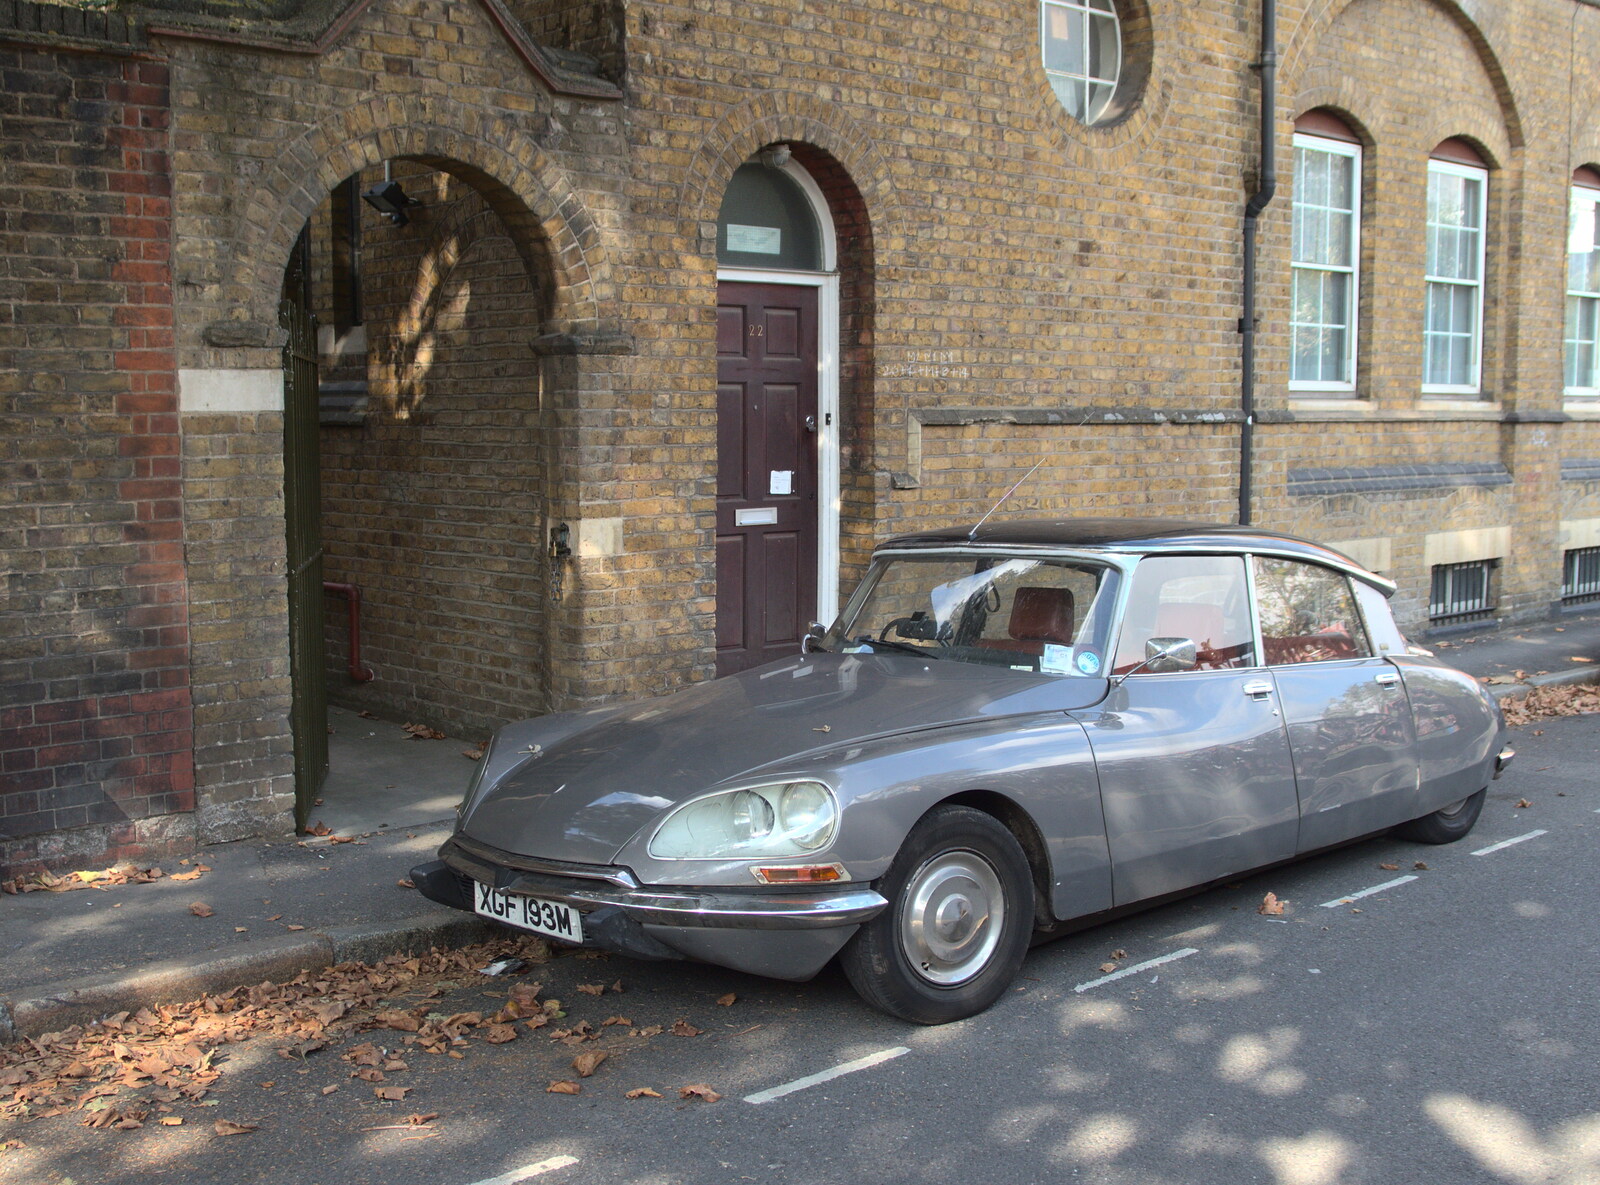 A nice old Citroën CX2 on Redcross Way from A House Built of Wax and Diss Randomness, Southwark Street, London - 30th September 2014